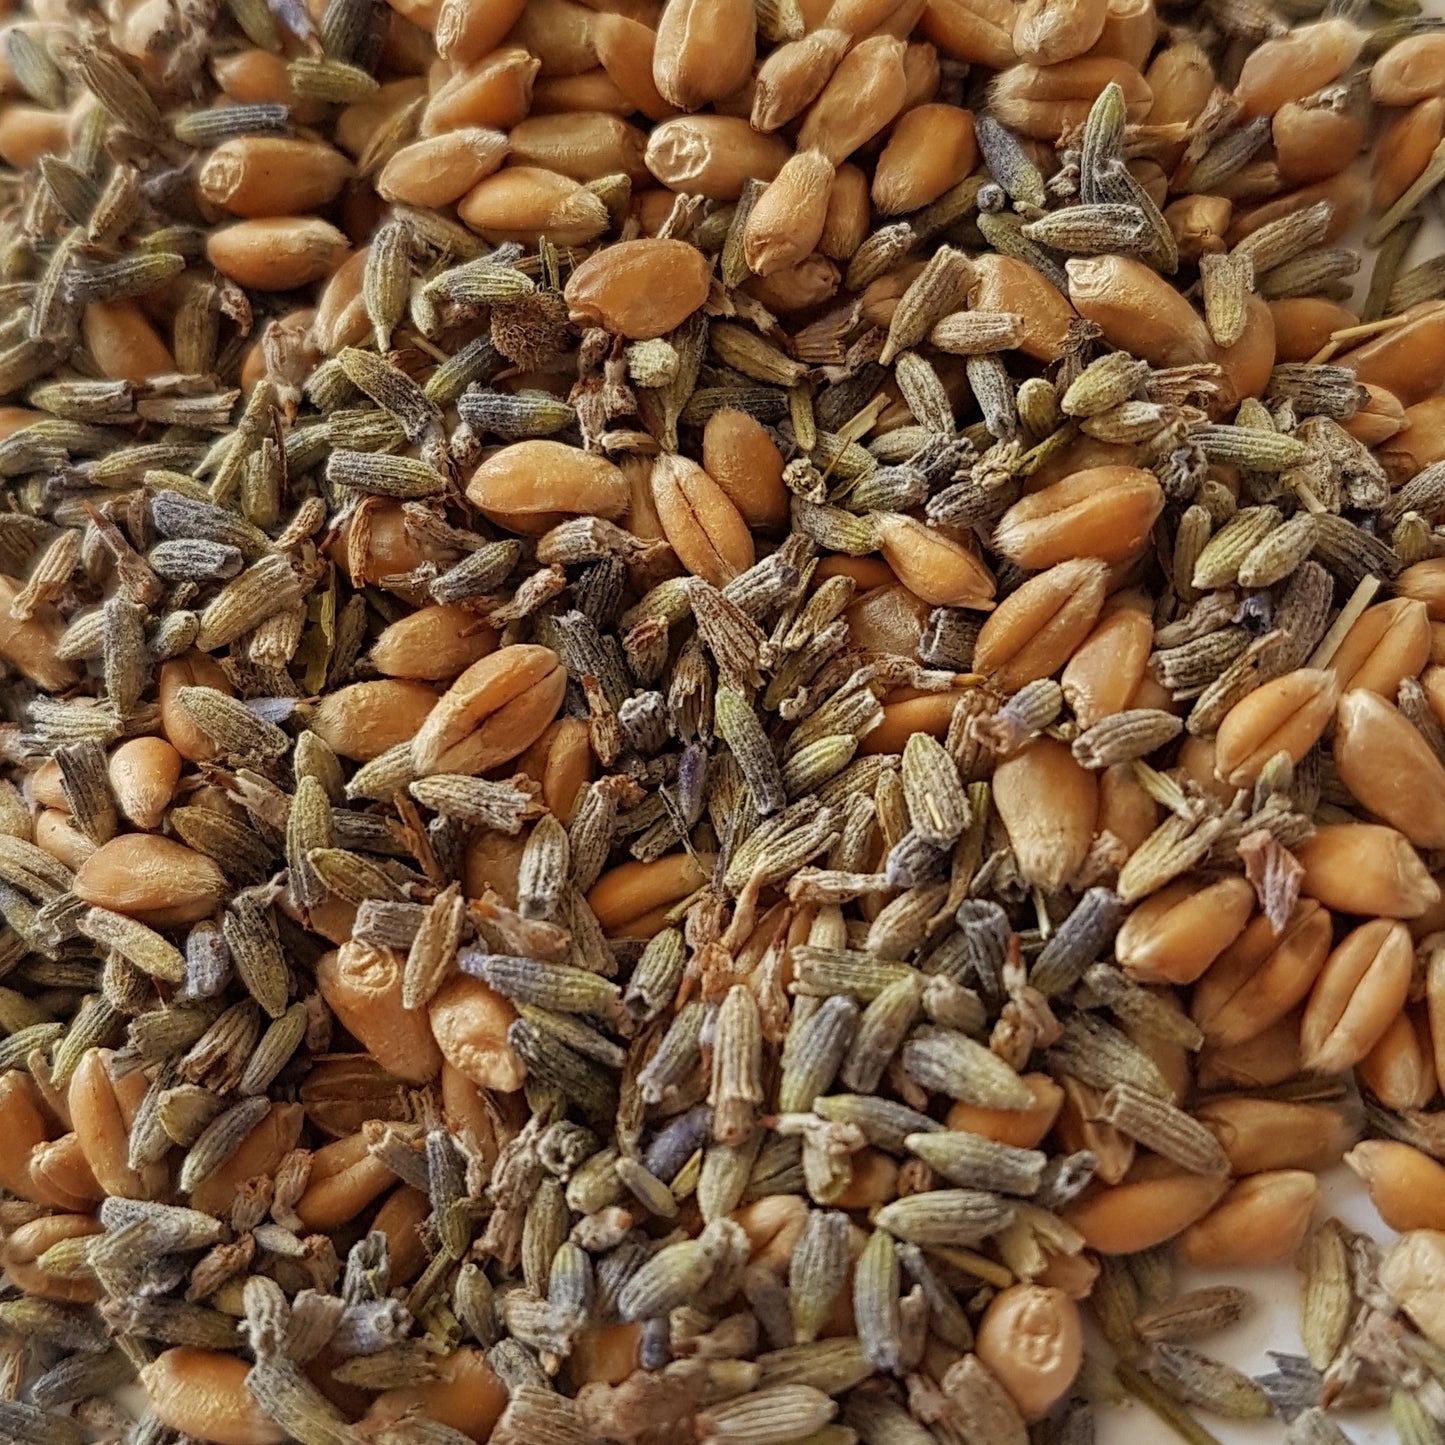 English lavender buds mixed with Somerset whole wheat, filling used for WheatBagHeaven wheat bags